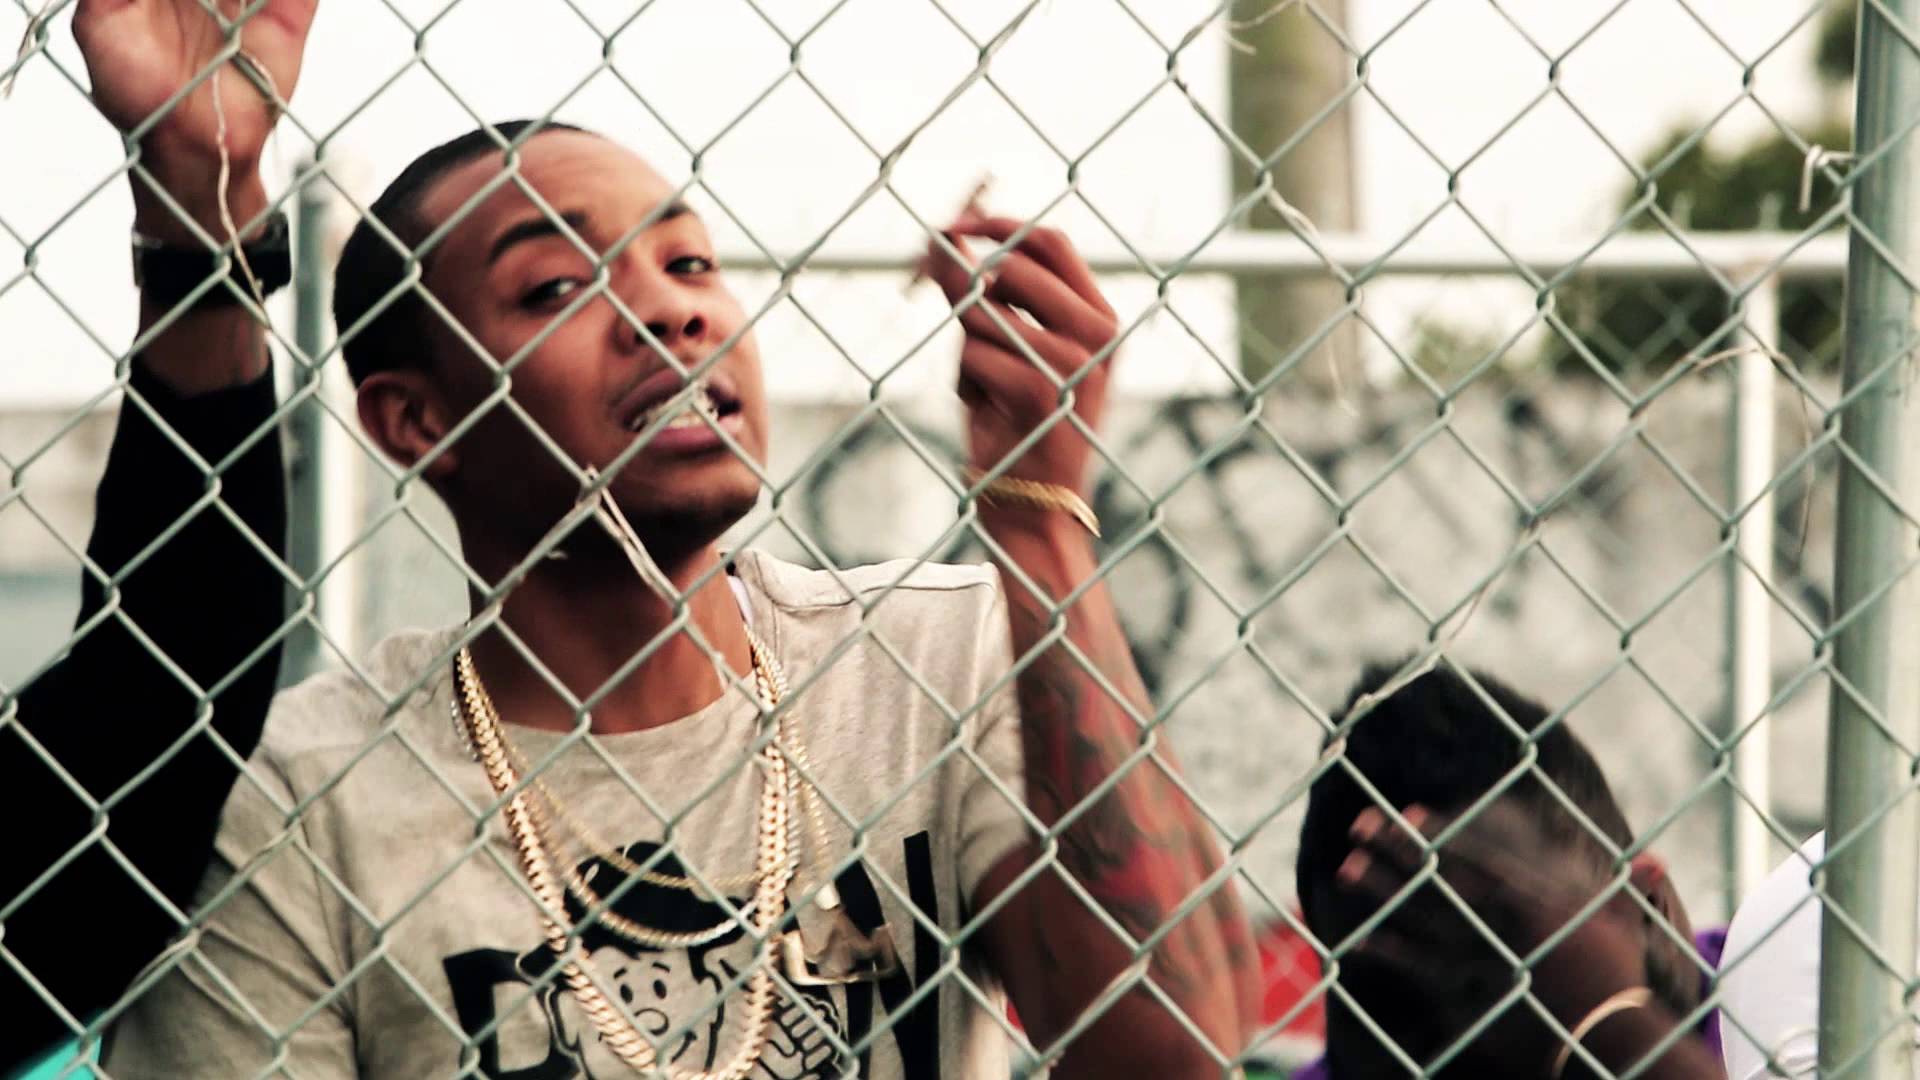 Music Video: G HERBO Ft. LIL BIBBY - "DON’T WORRY" Official 